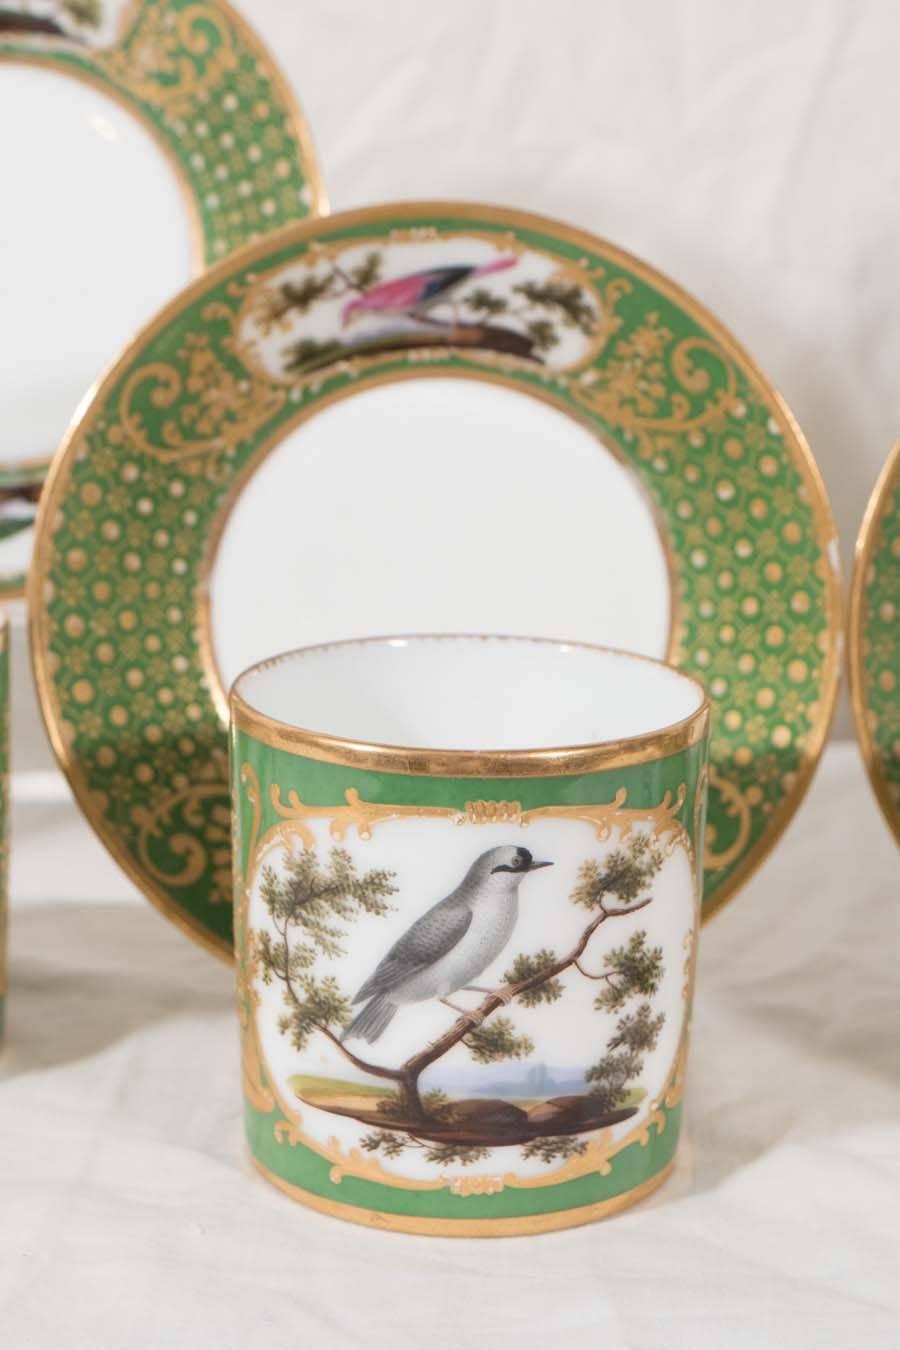 These cups are of the highest quality. Each is beautifully hand-painted by Feuillet showing an individual bird lighting on a branch. The green ground has exceptional gilding particularly surrounding the handle (see image #7).
Marked on the bottom